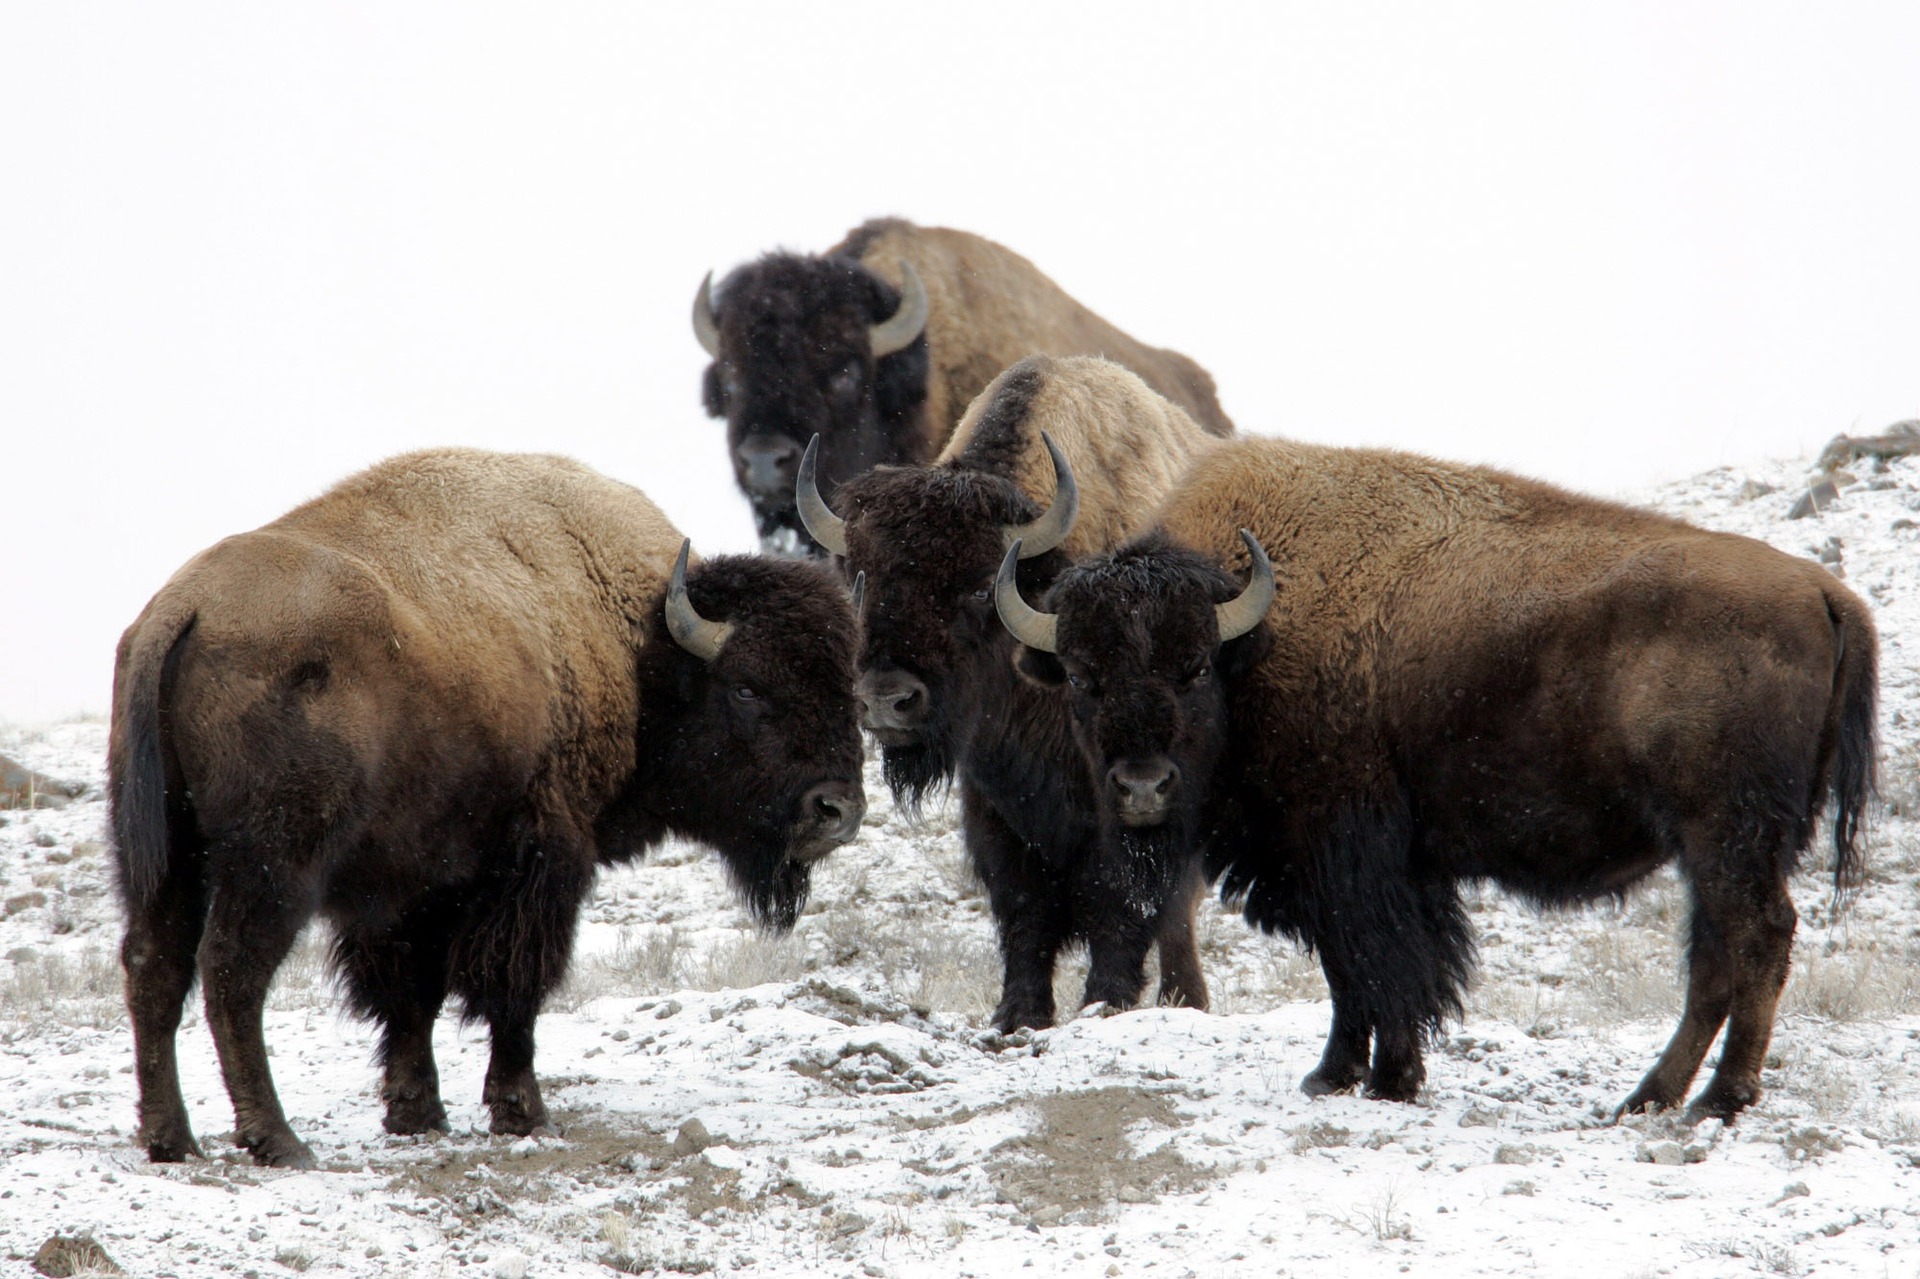 4 head of bison standing in a snowy field